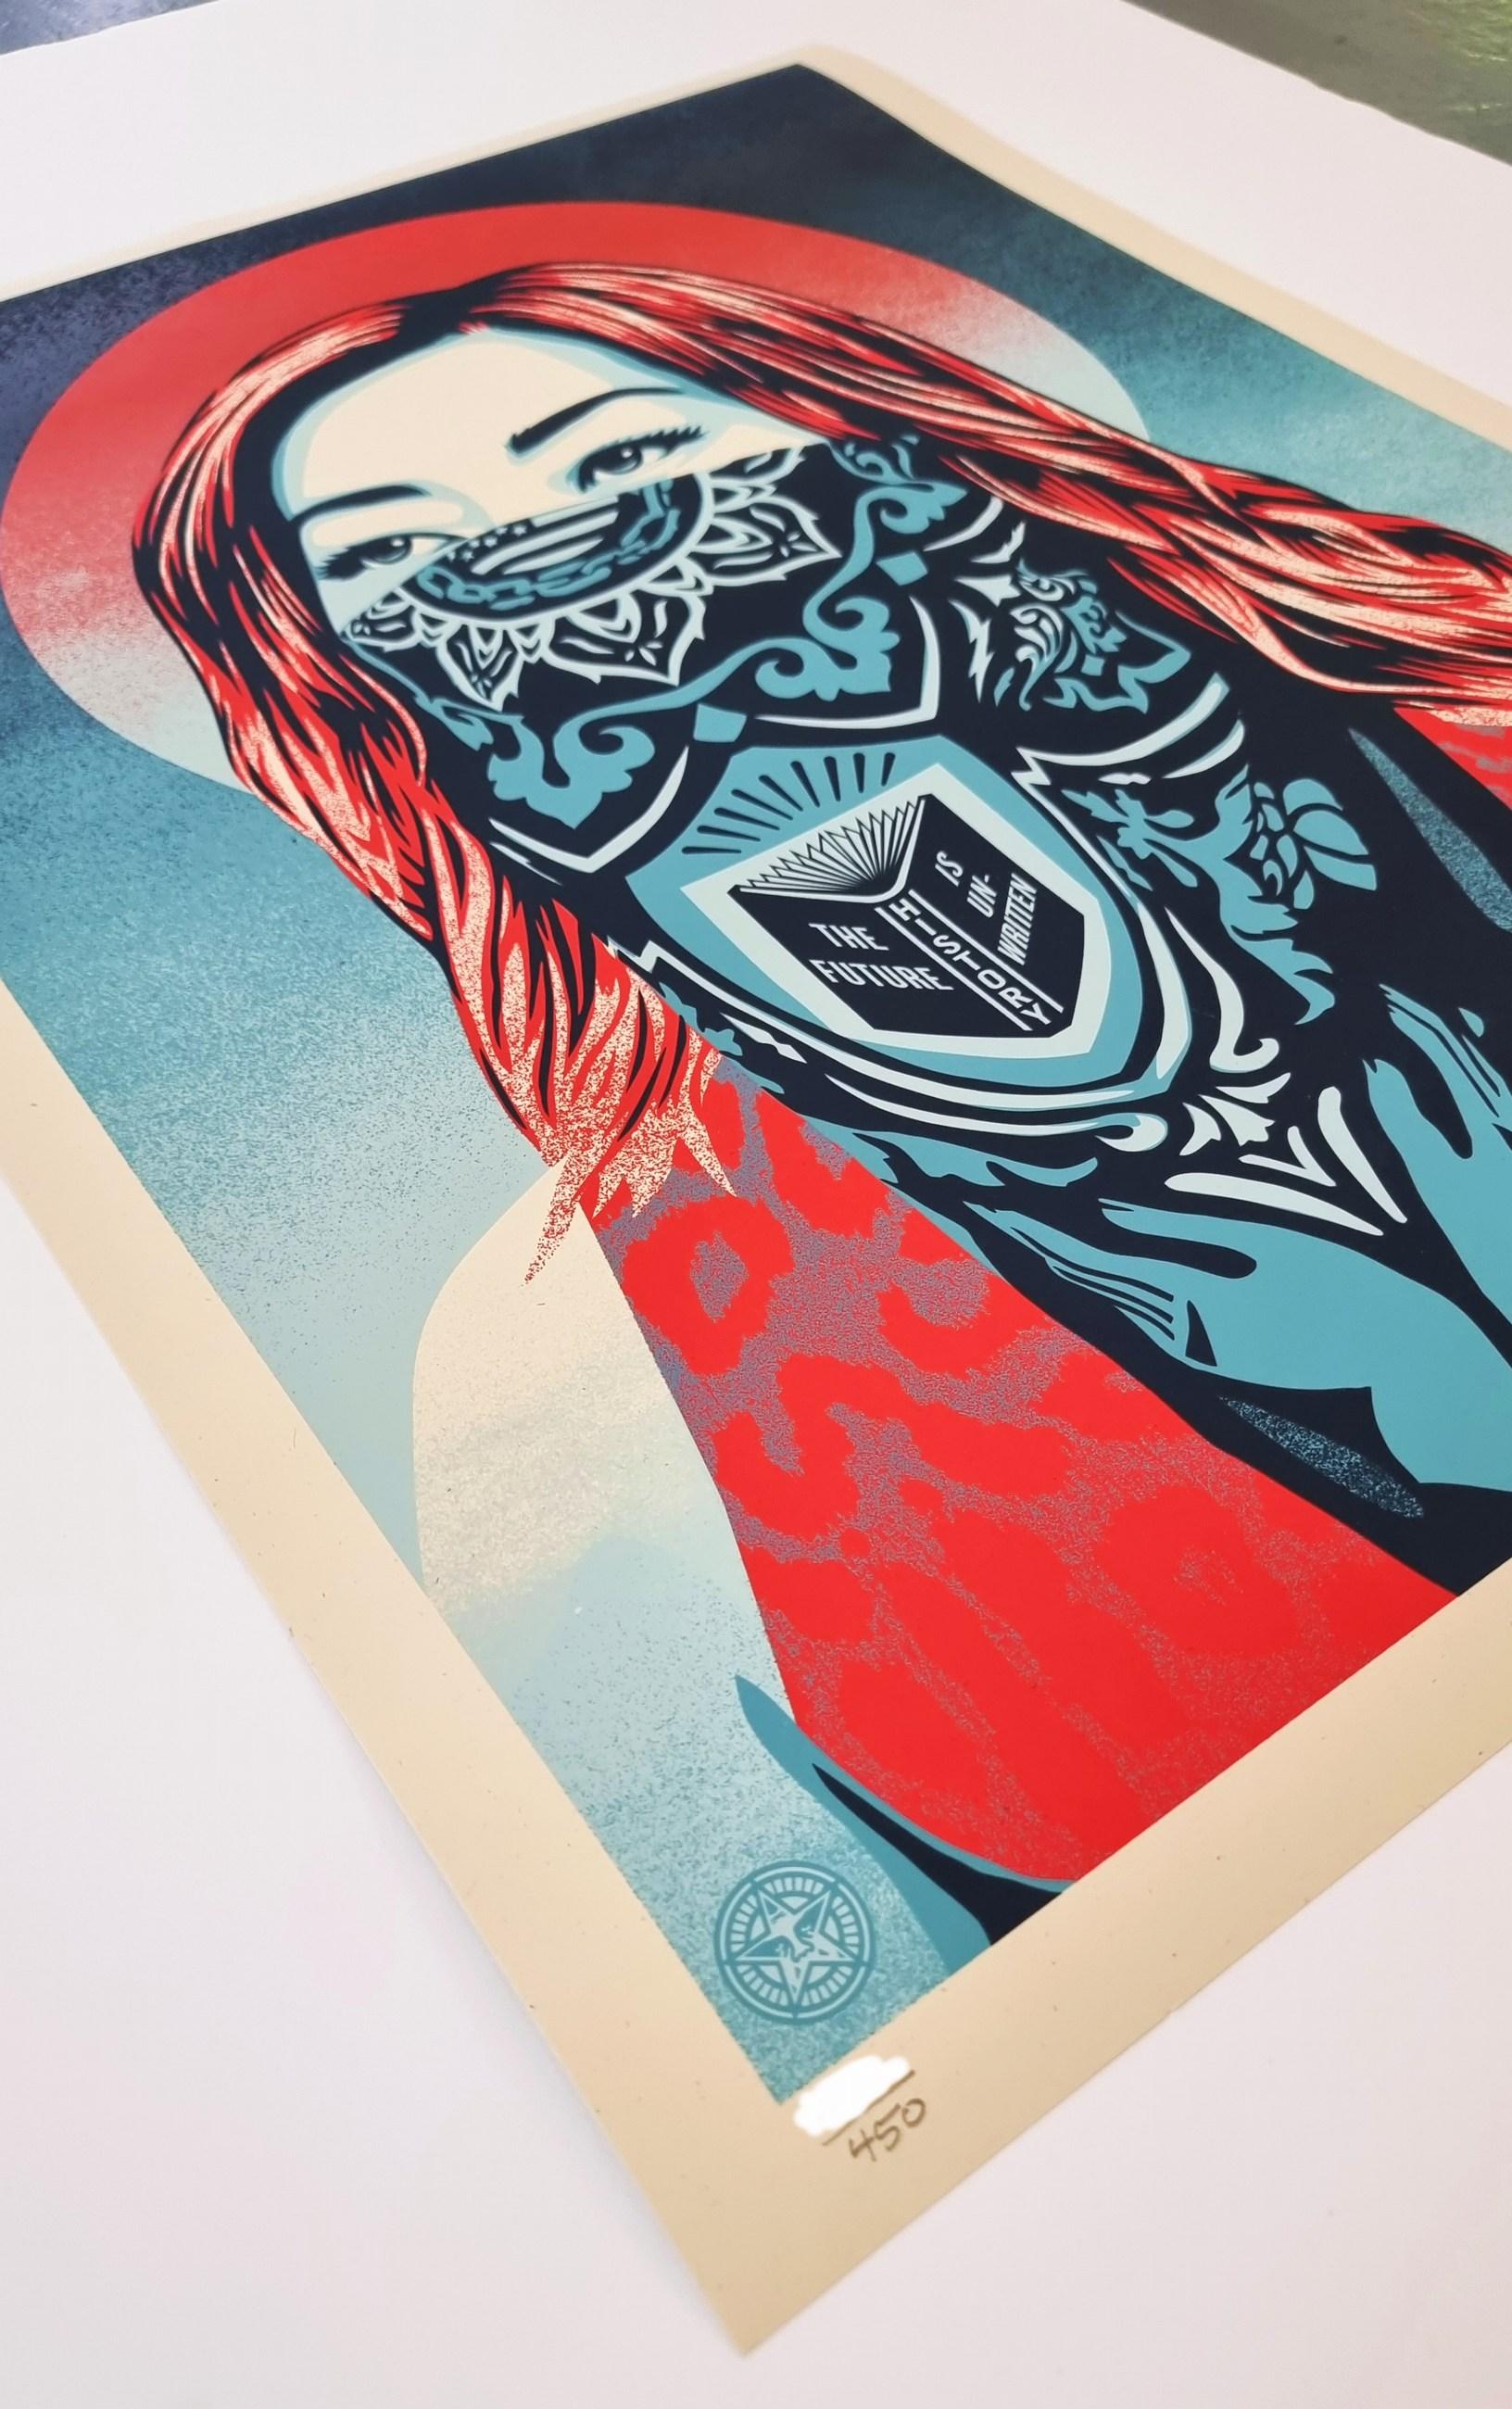 Shepard Fairey
Just Future Rising
Screen print on thick cream Speckletone paper
Year: 2021
Size: 18.0 x 24.0 inches
Edition: 450
Signed, dated and numbered by hand
COA provided

Frank Shepard Fairey (born February 15, 1970) is an American